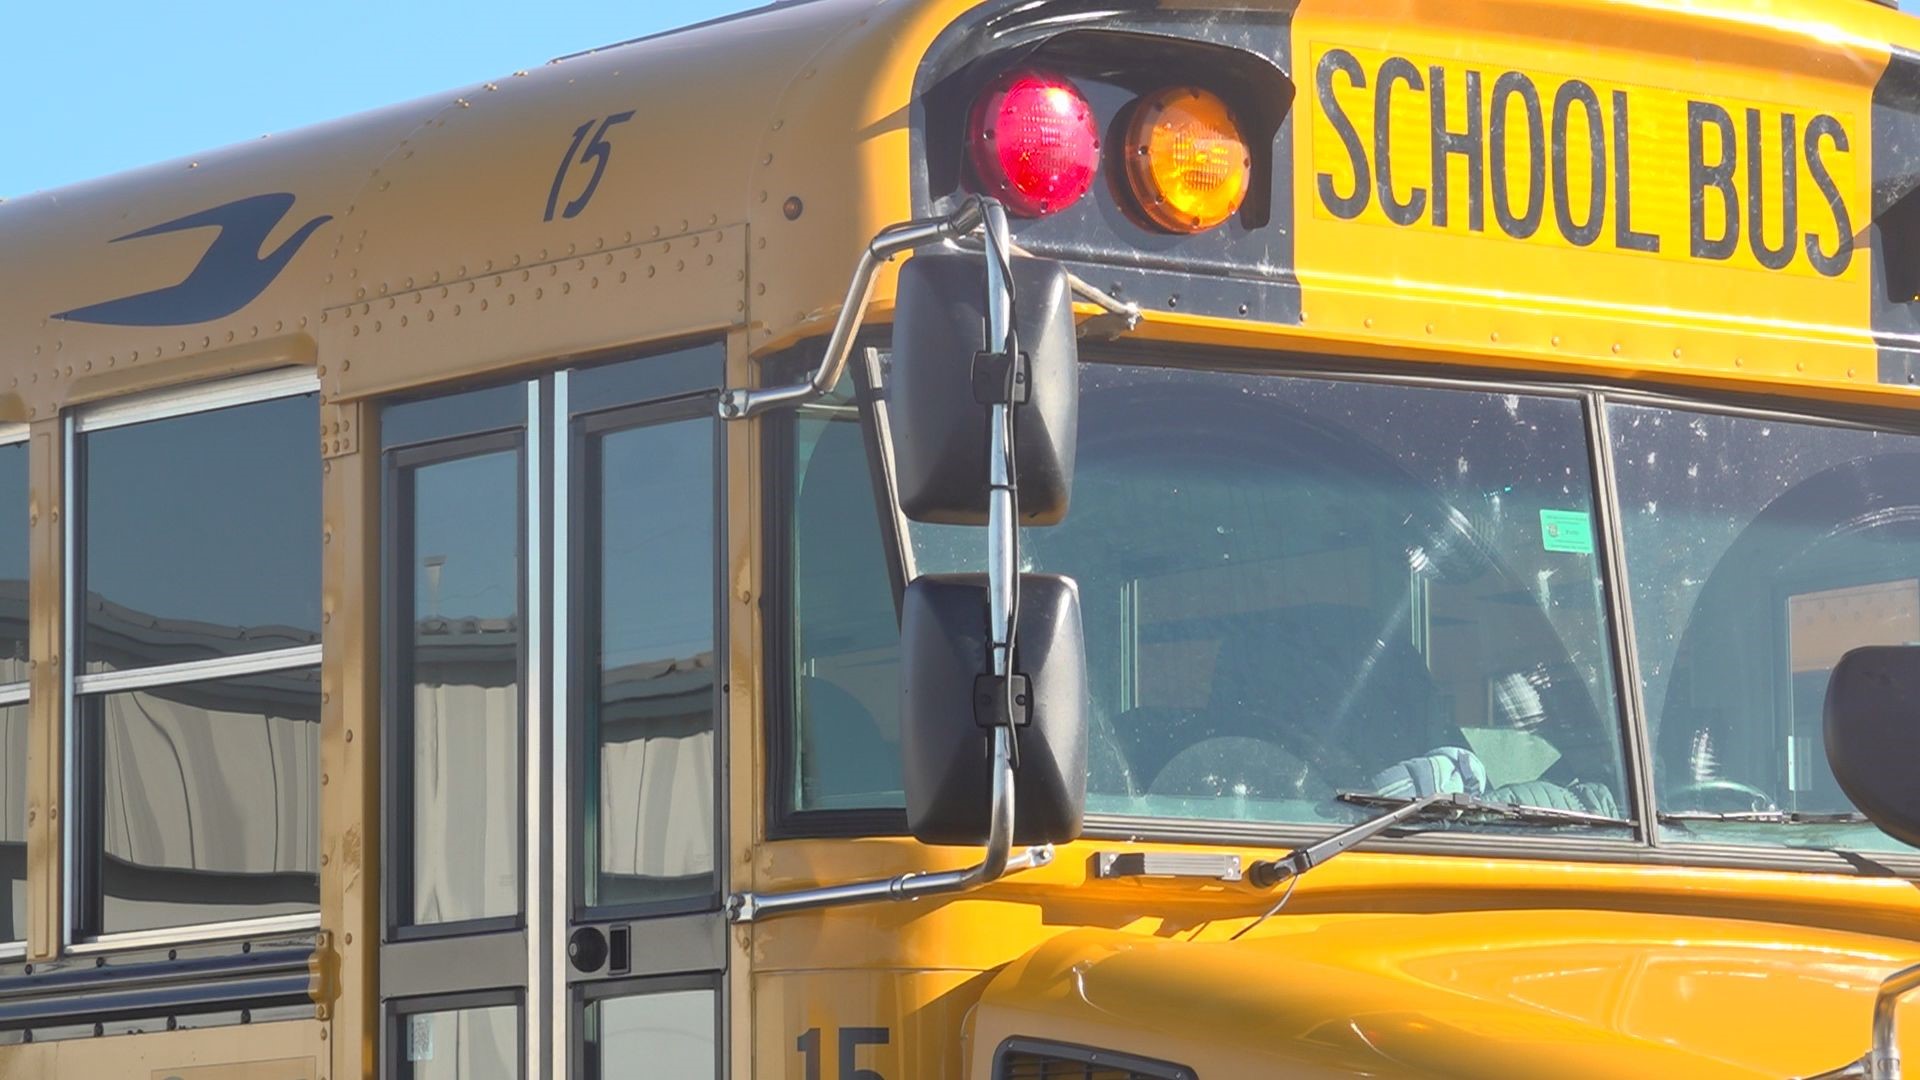 Deputies are releasing more information about a "severe bullying" incident that happened on a Northview Public Schools bus last week.